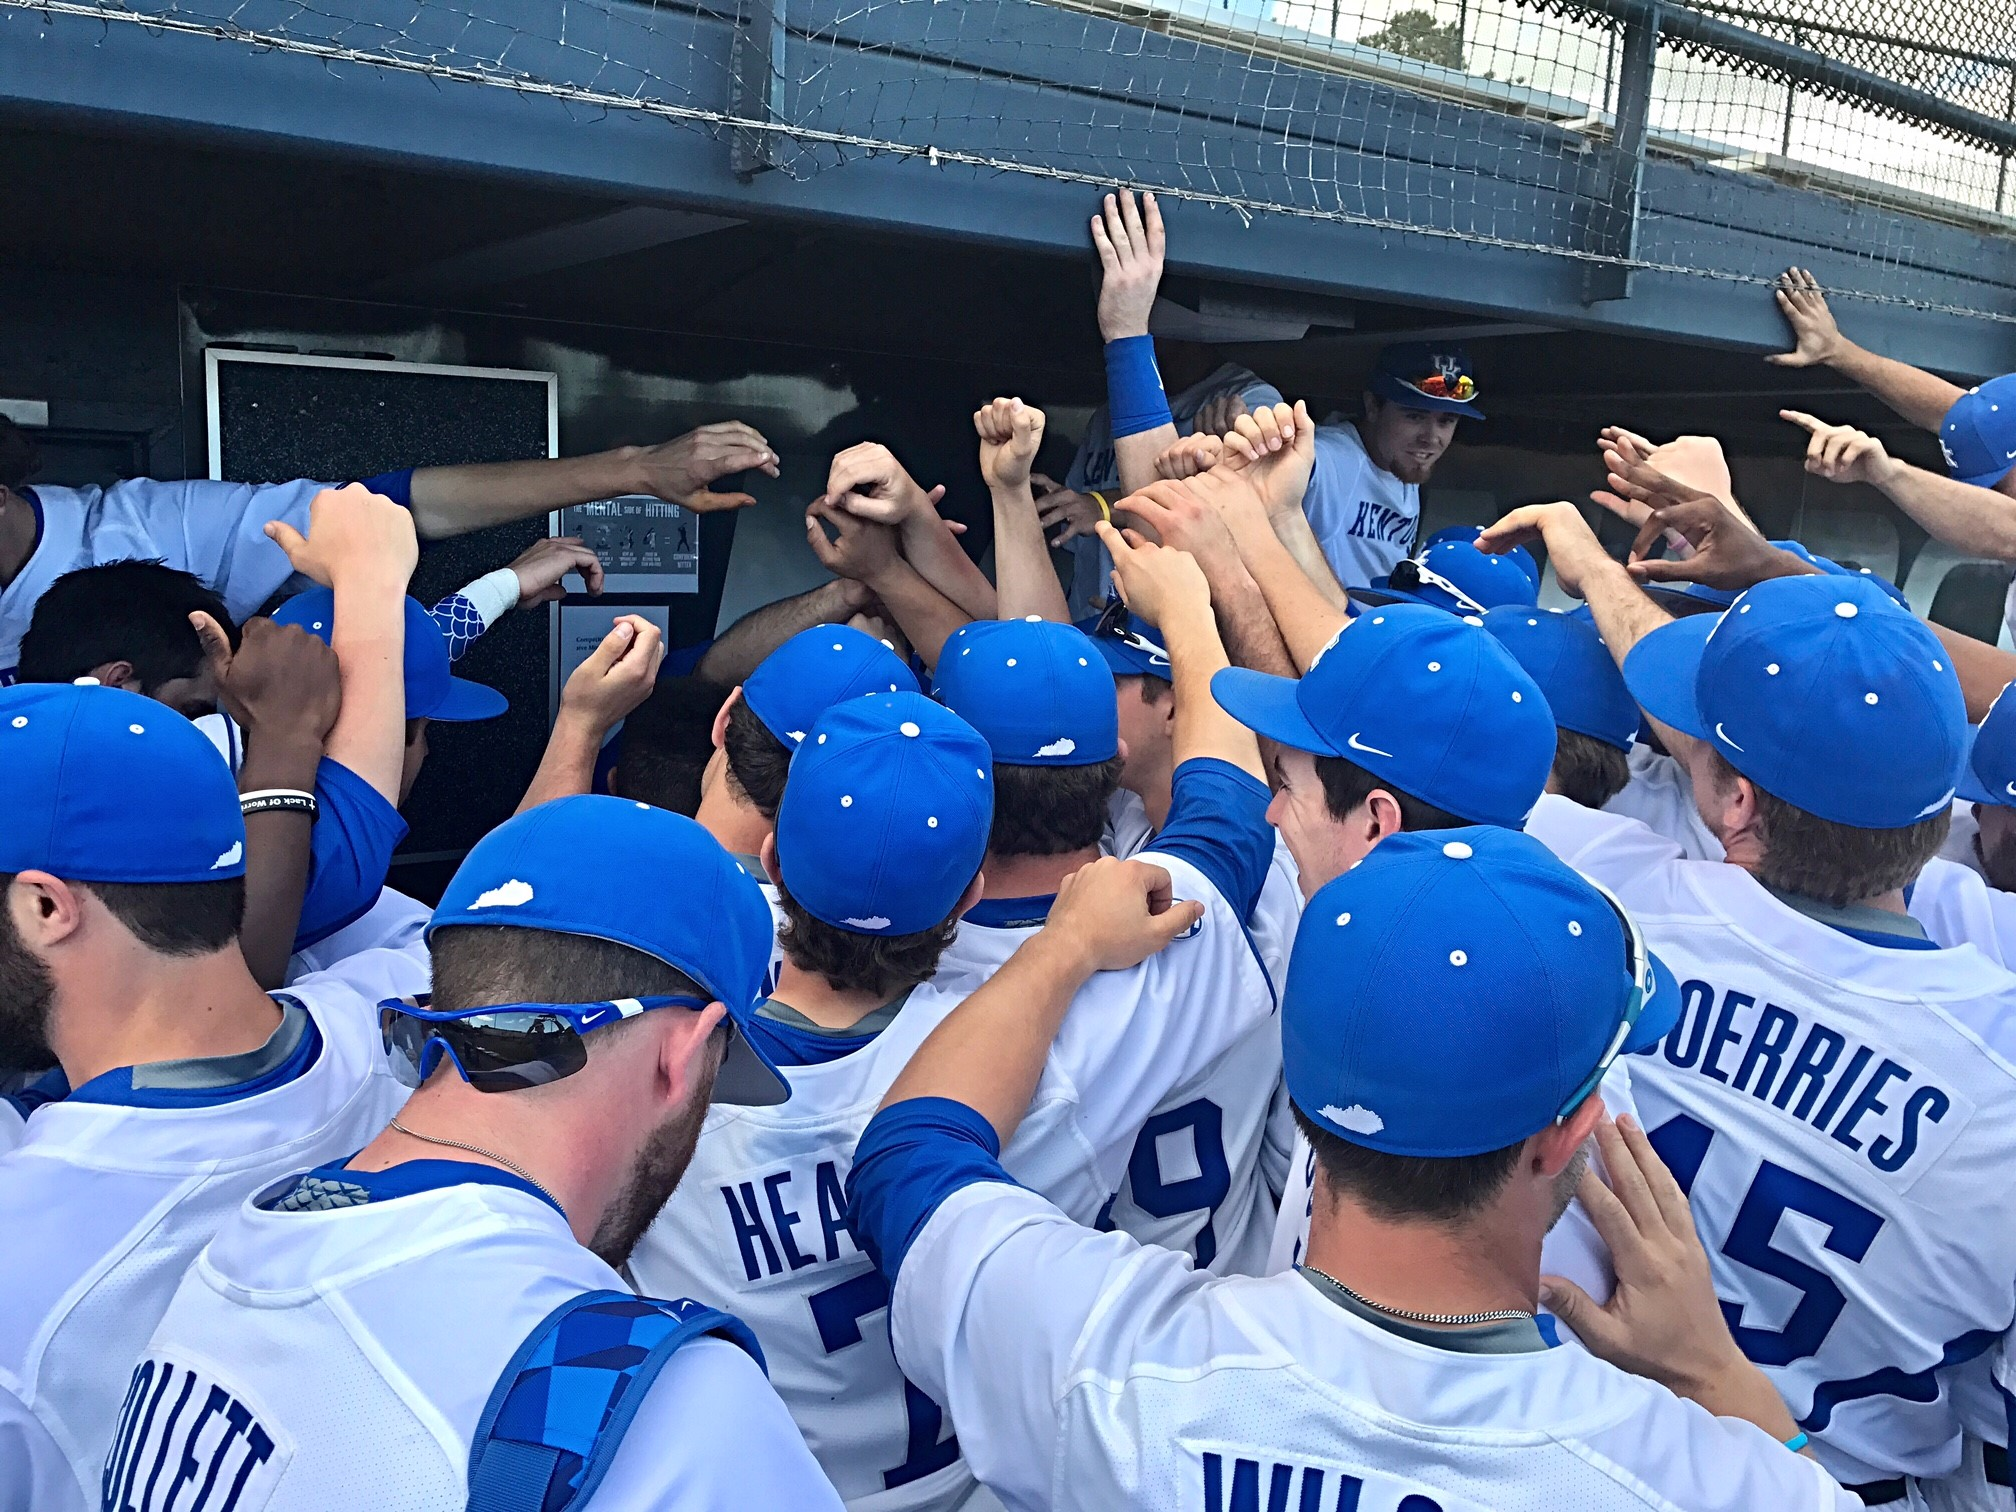 Seven-Run Fourth Inning Powers Kentucky to Mingione’s First Win